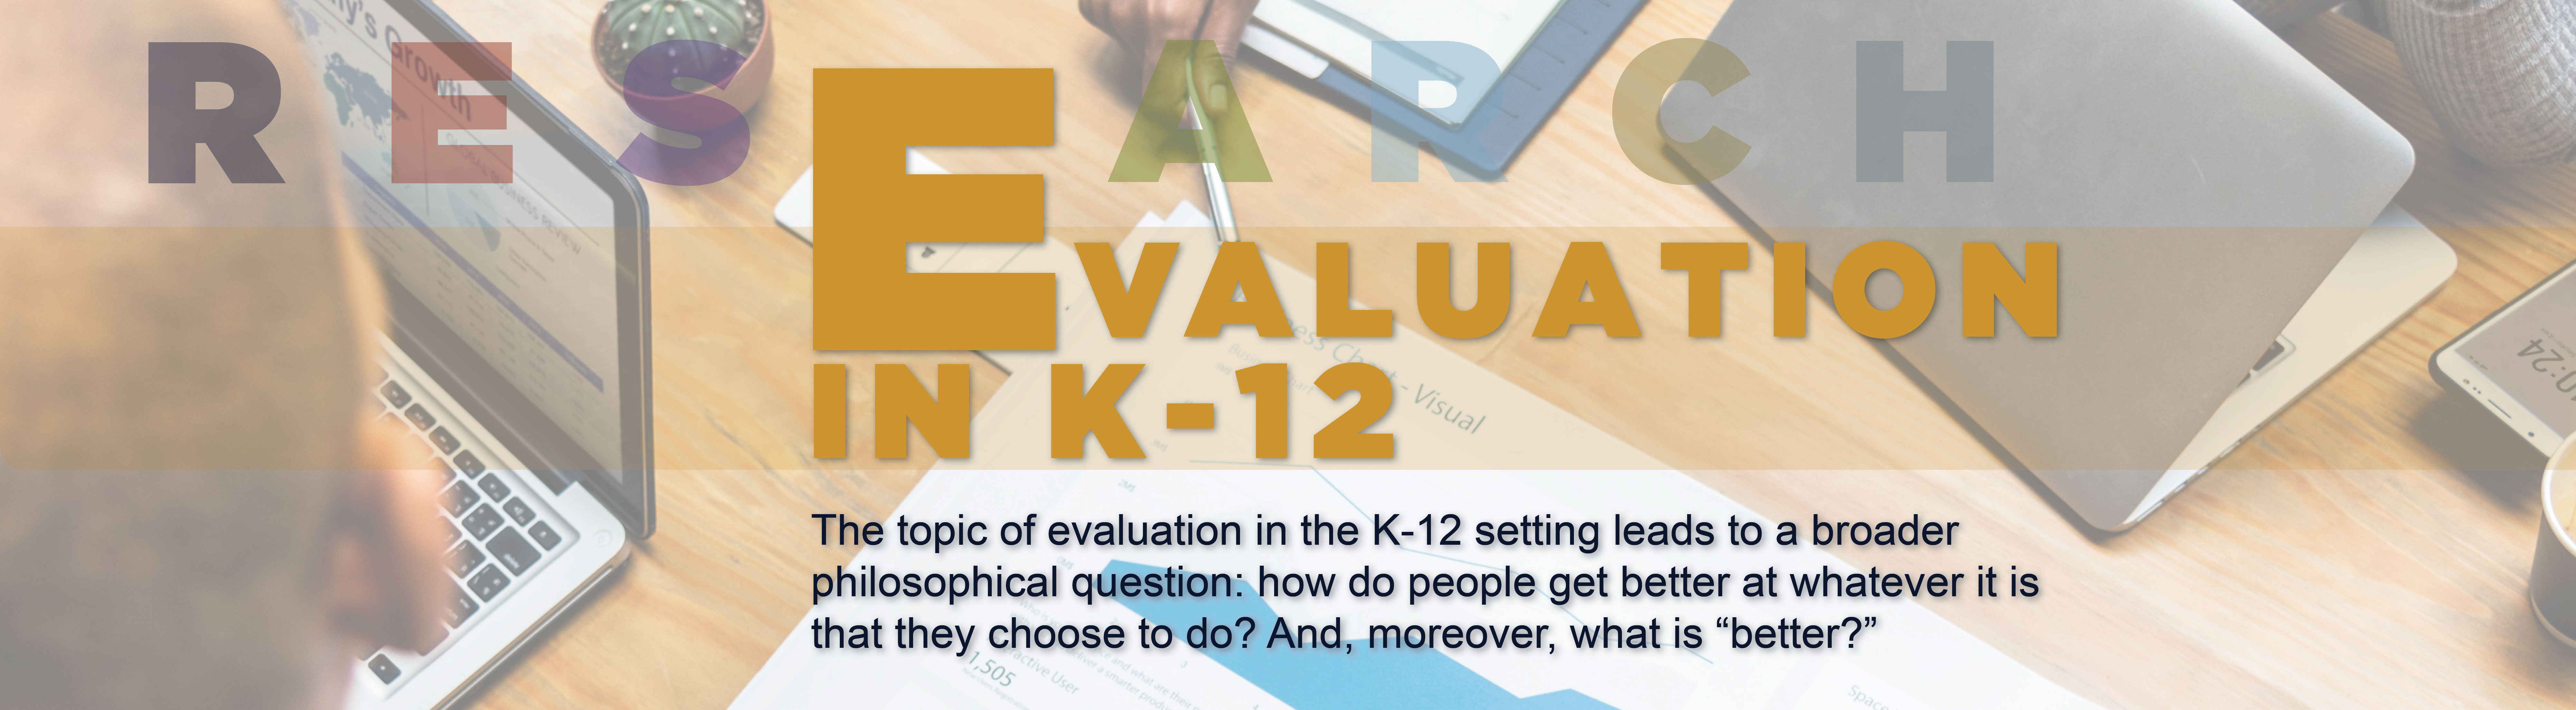 Image of laptop promoting Evaluation in K-12: "The Topic of evaluation in the K-12 setting leads to a broader philosophical question: how do people get better at whatever it is that they choose to do?  And, moreover, what is 'better'? - Quote by Dr. Morgaen Donaldson